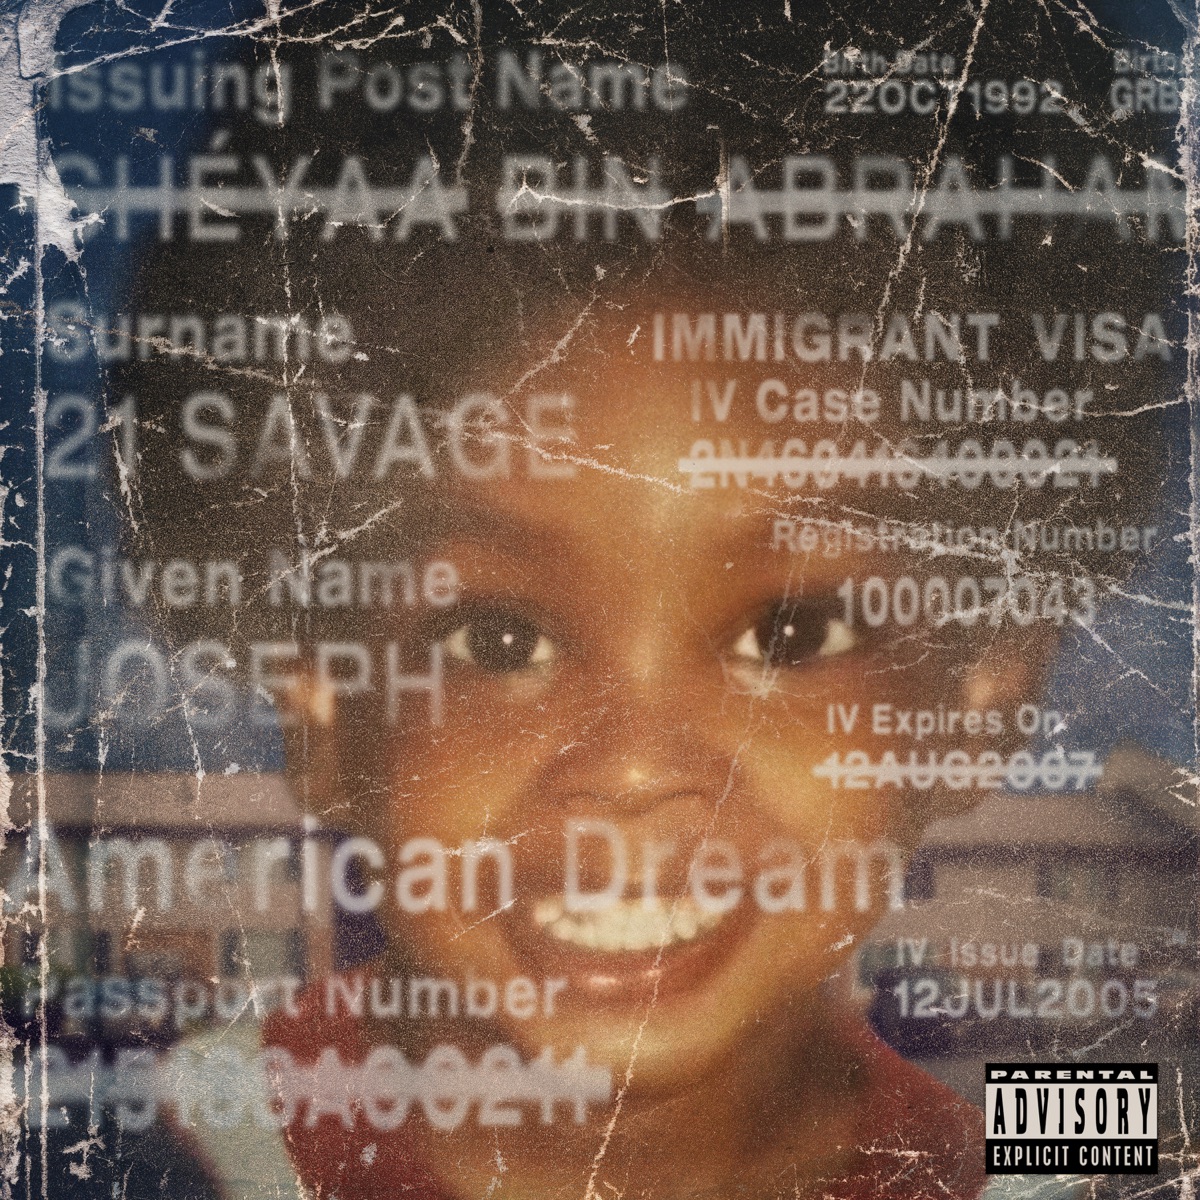 The album cover of 21 Savages american dream, featuring a photo of him as a child. 